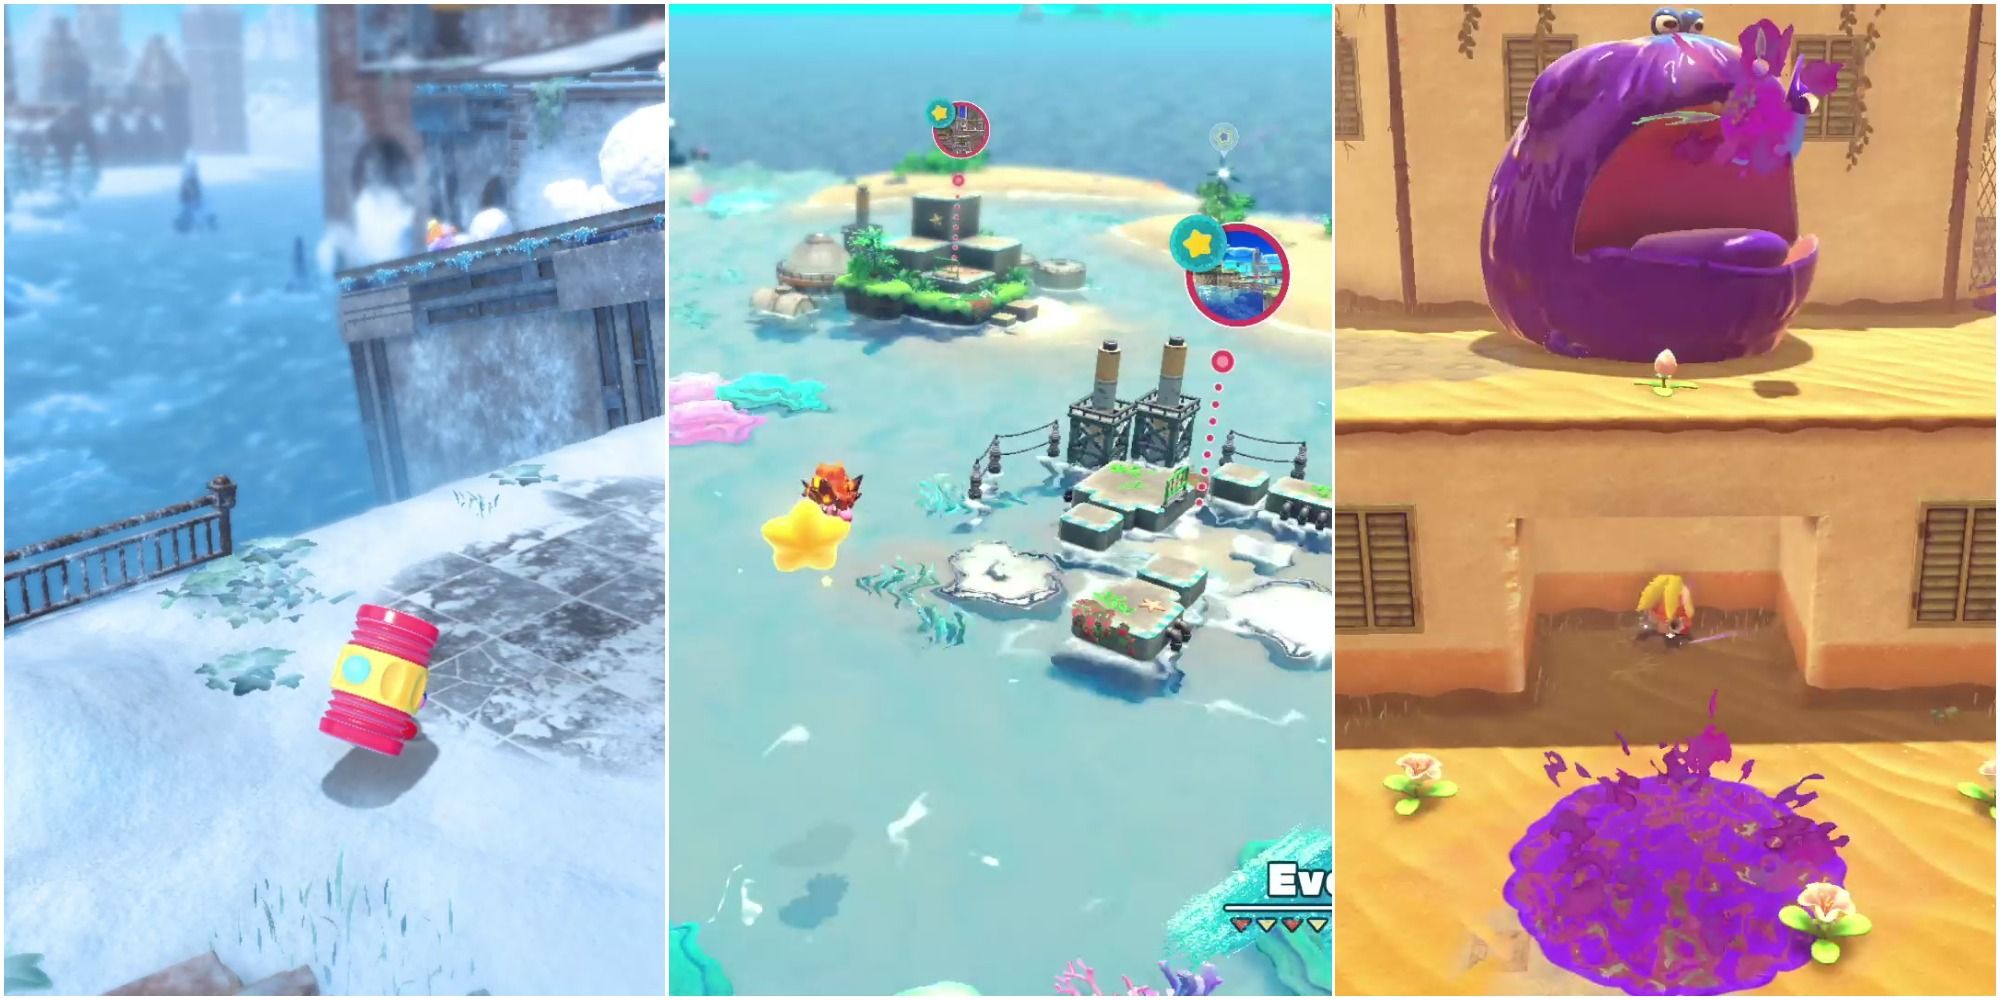 A split image from left to right: Kirby in Winter Horn, Kirby in Everbay Coast, Kirby facing frog in Orginull Wasteland